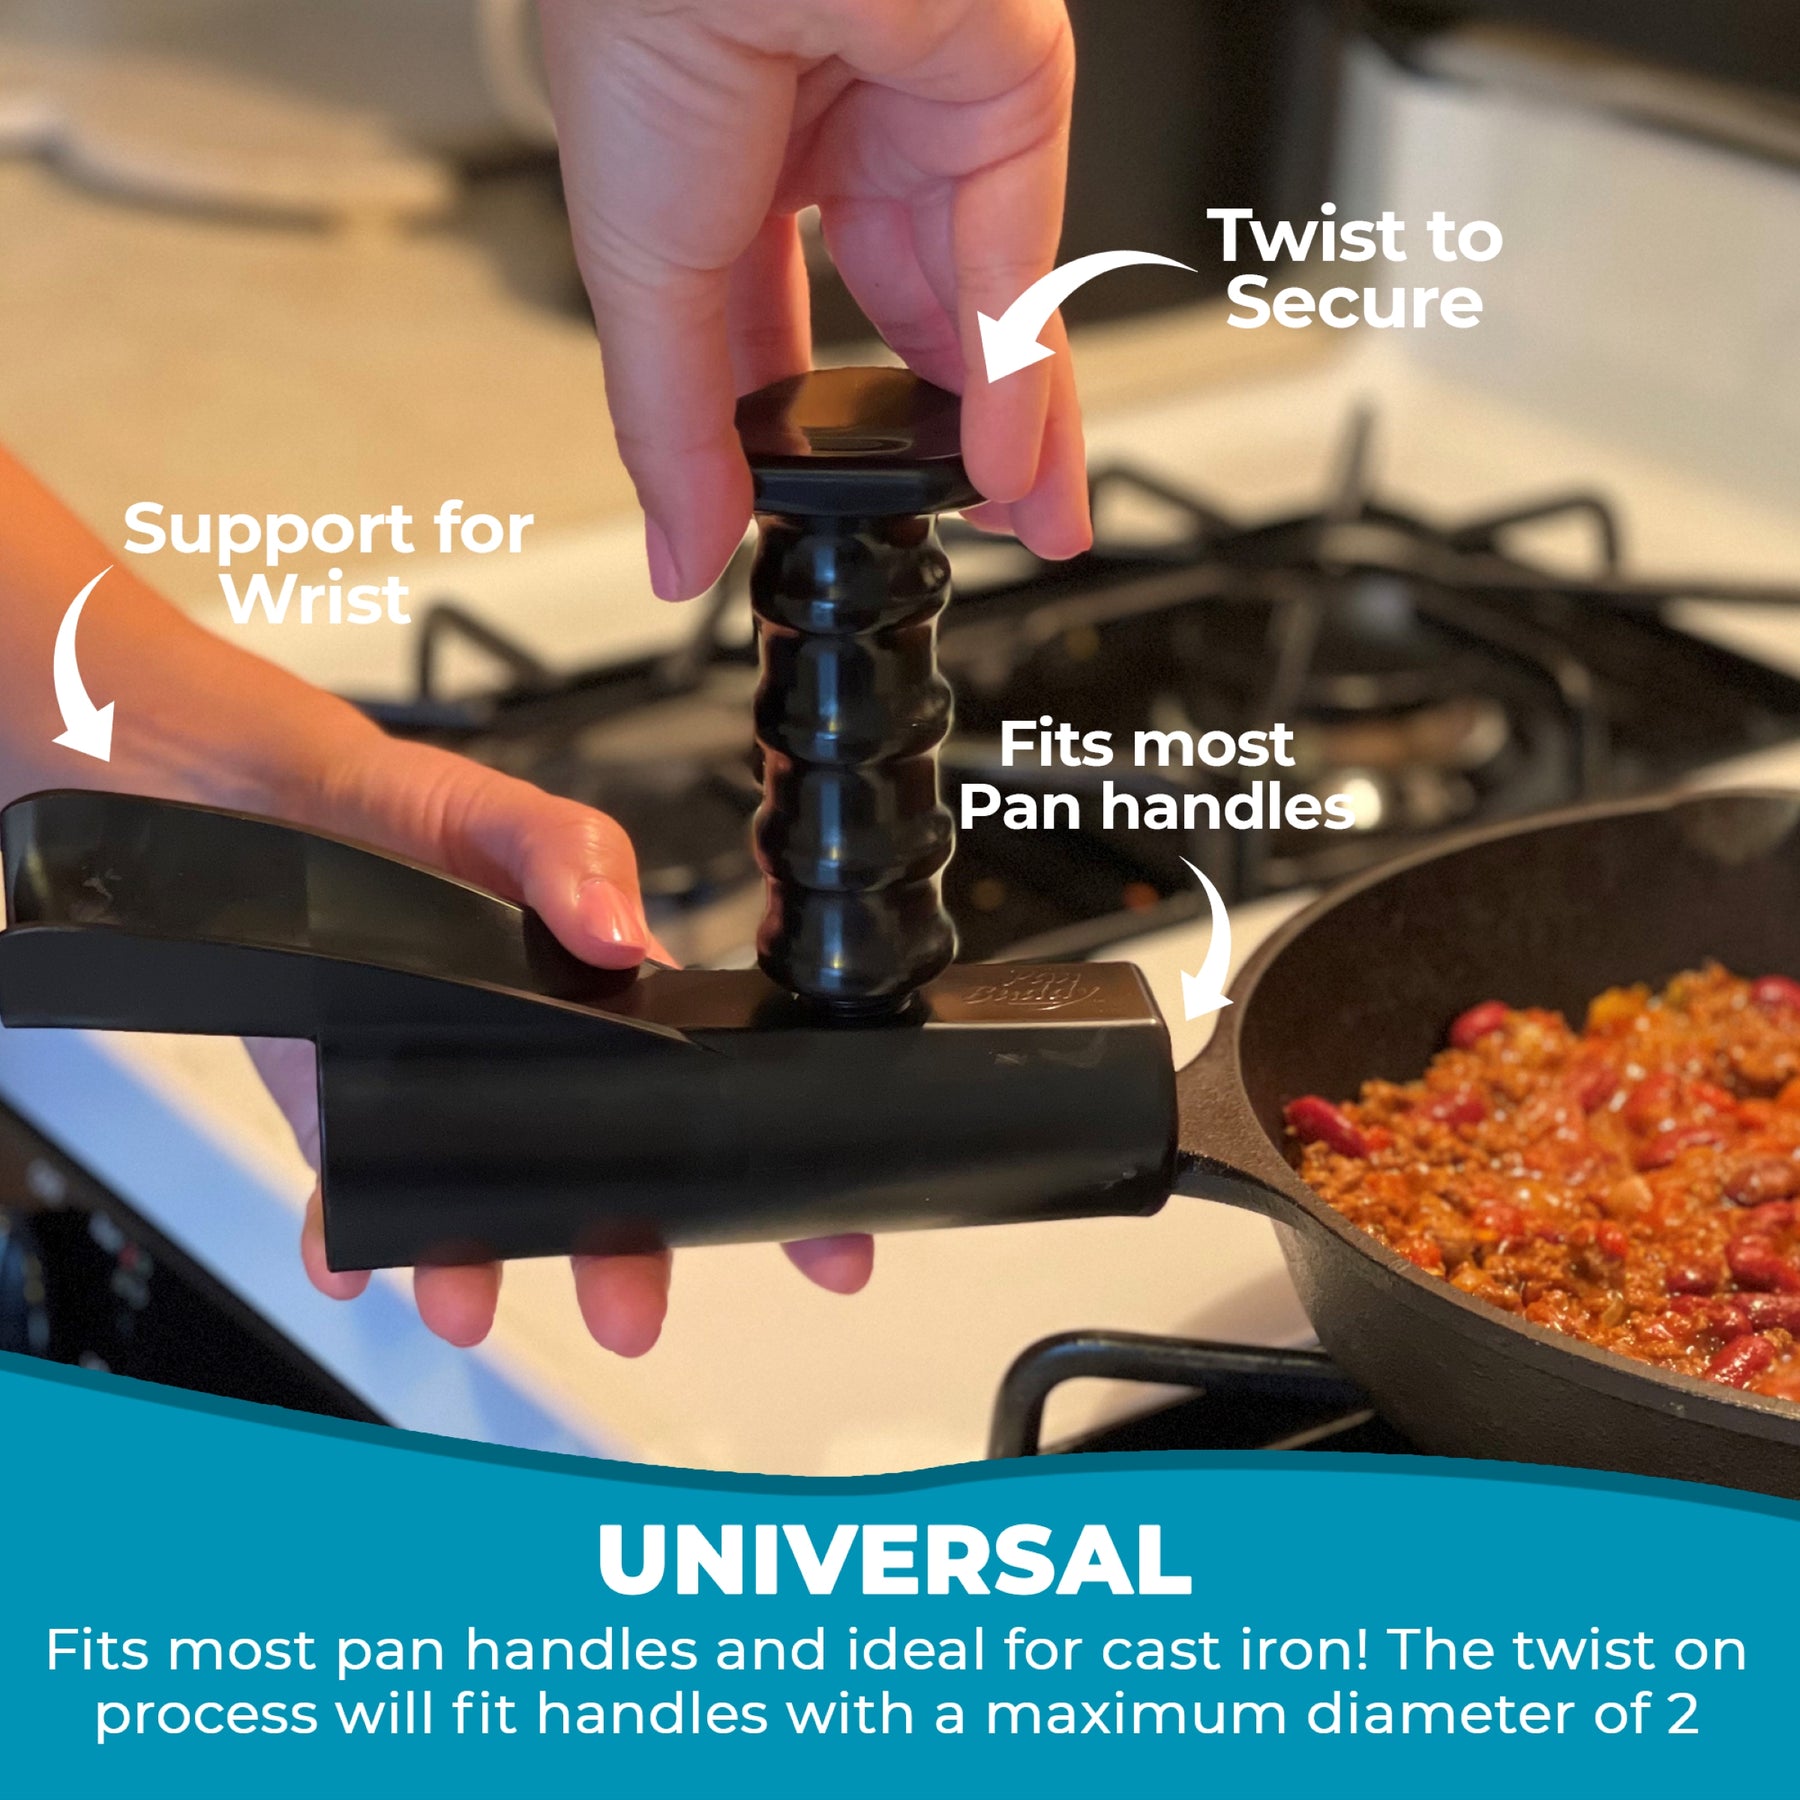 KitchInventions 2pack Pan Buddy Universal Wrist Support 